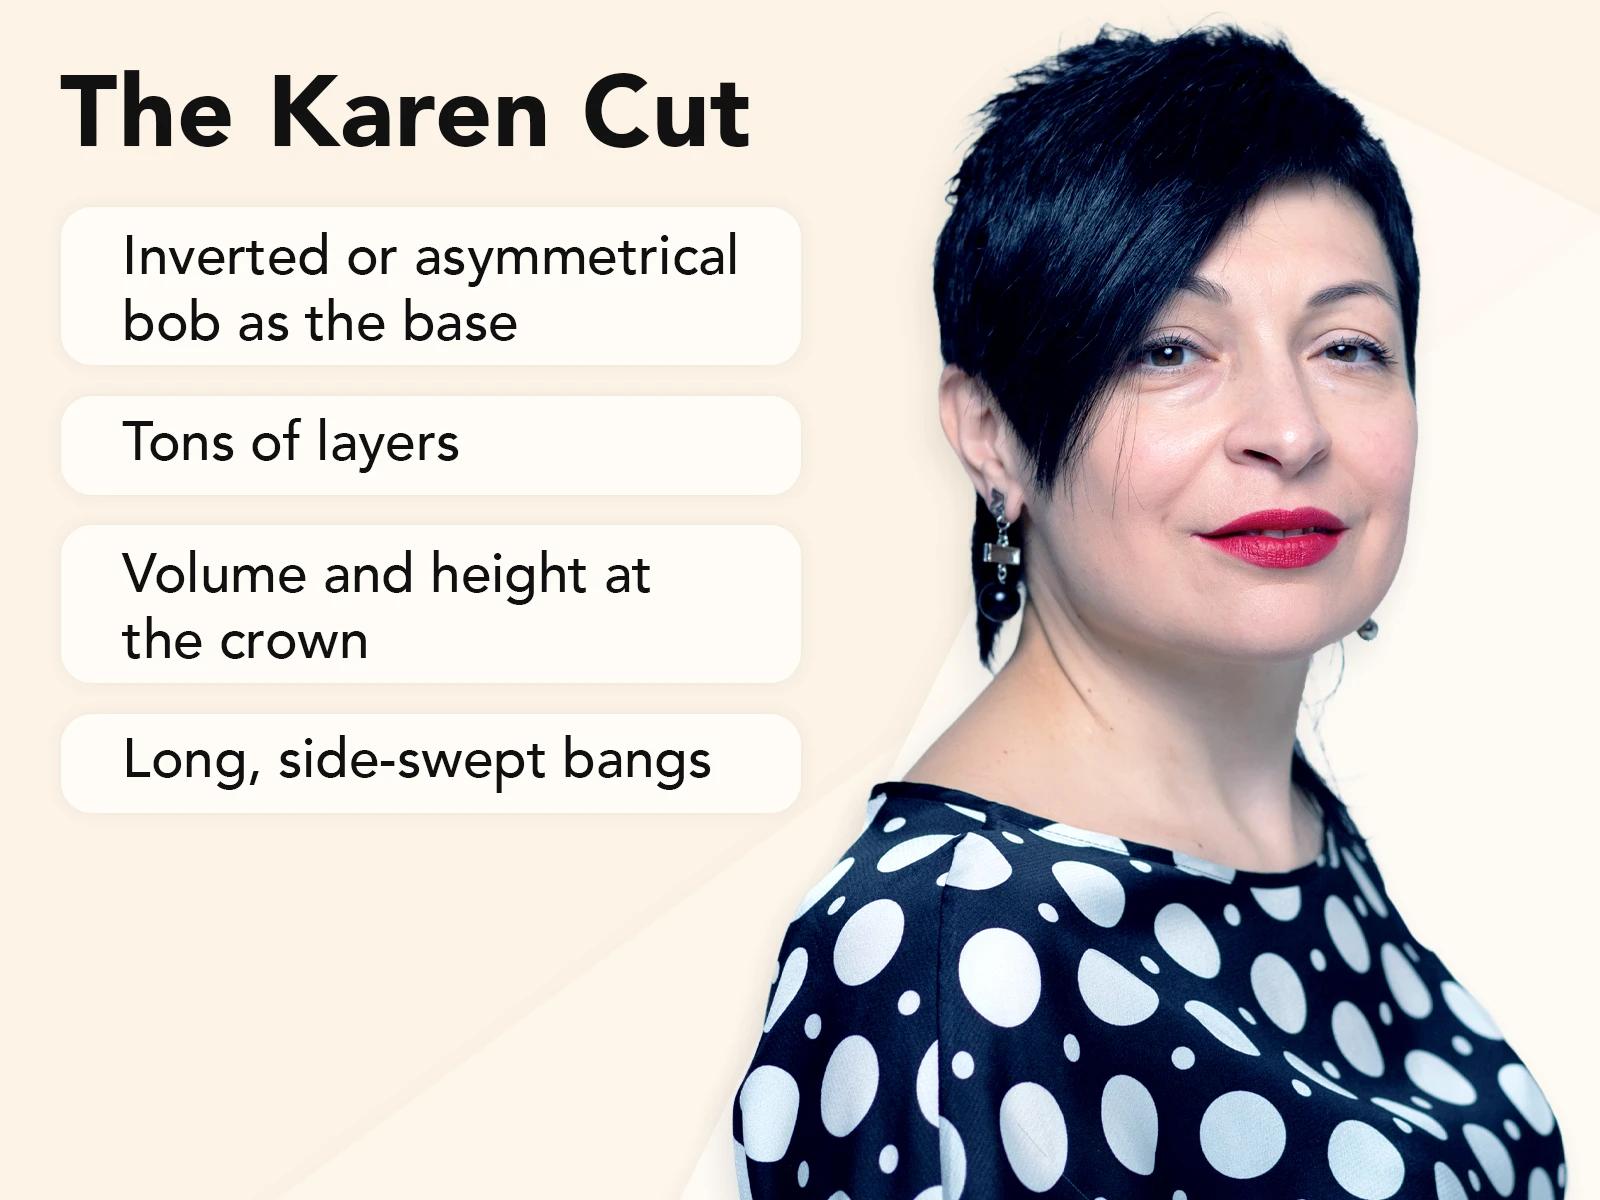 The karen haircut explainer image on a tan background